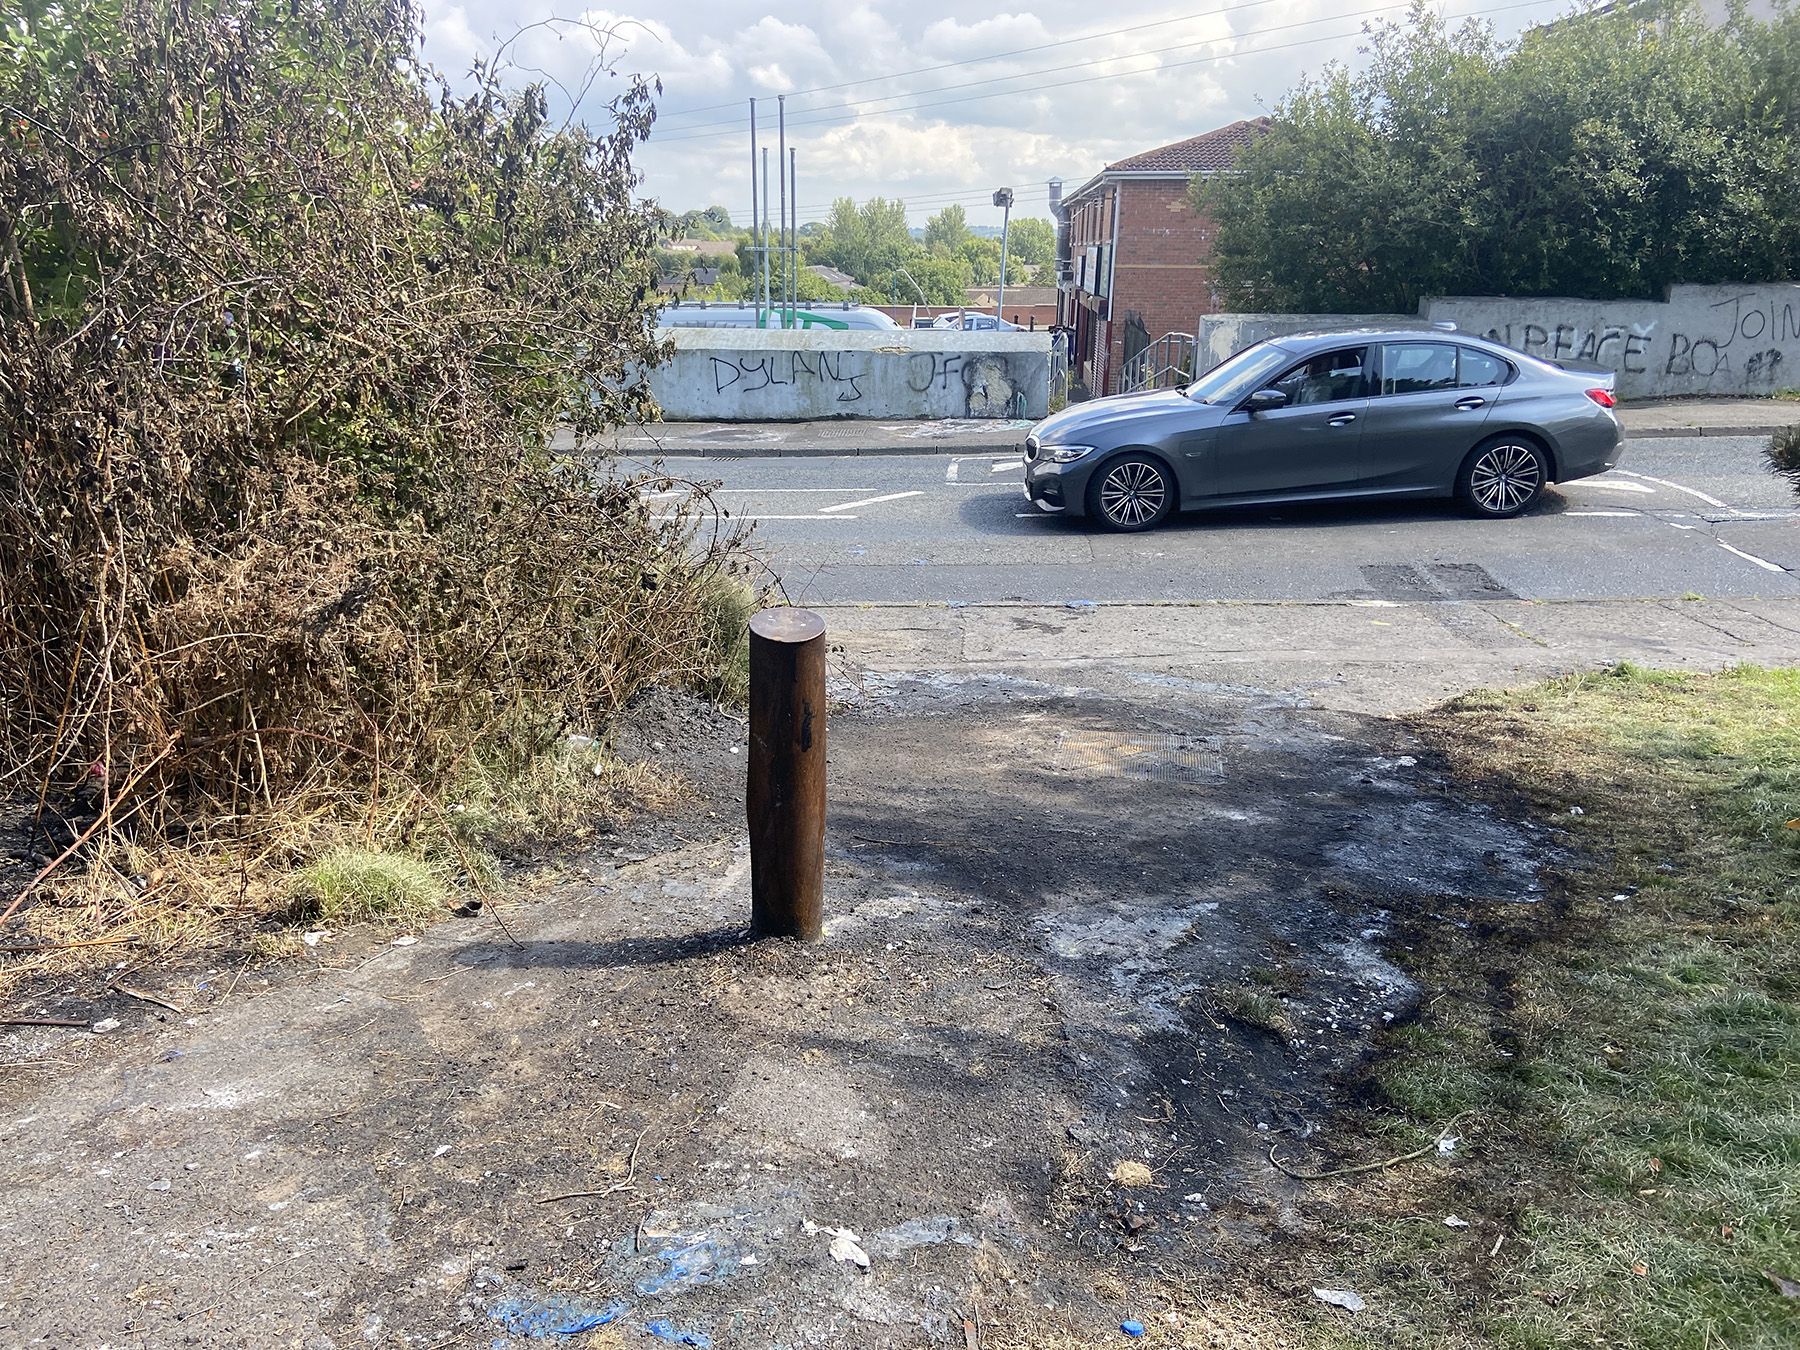 SCENE OF FIRE: The area has been the target of recent anti-social behaviour